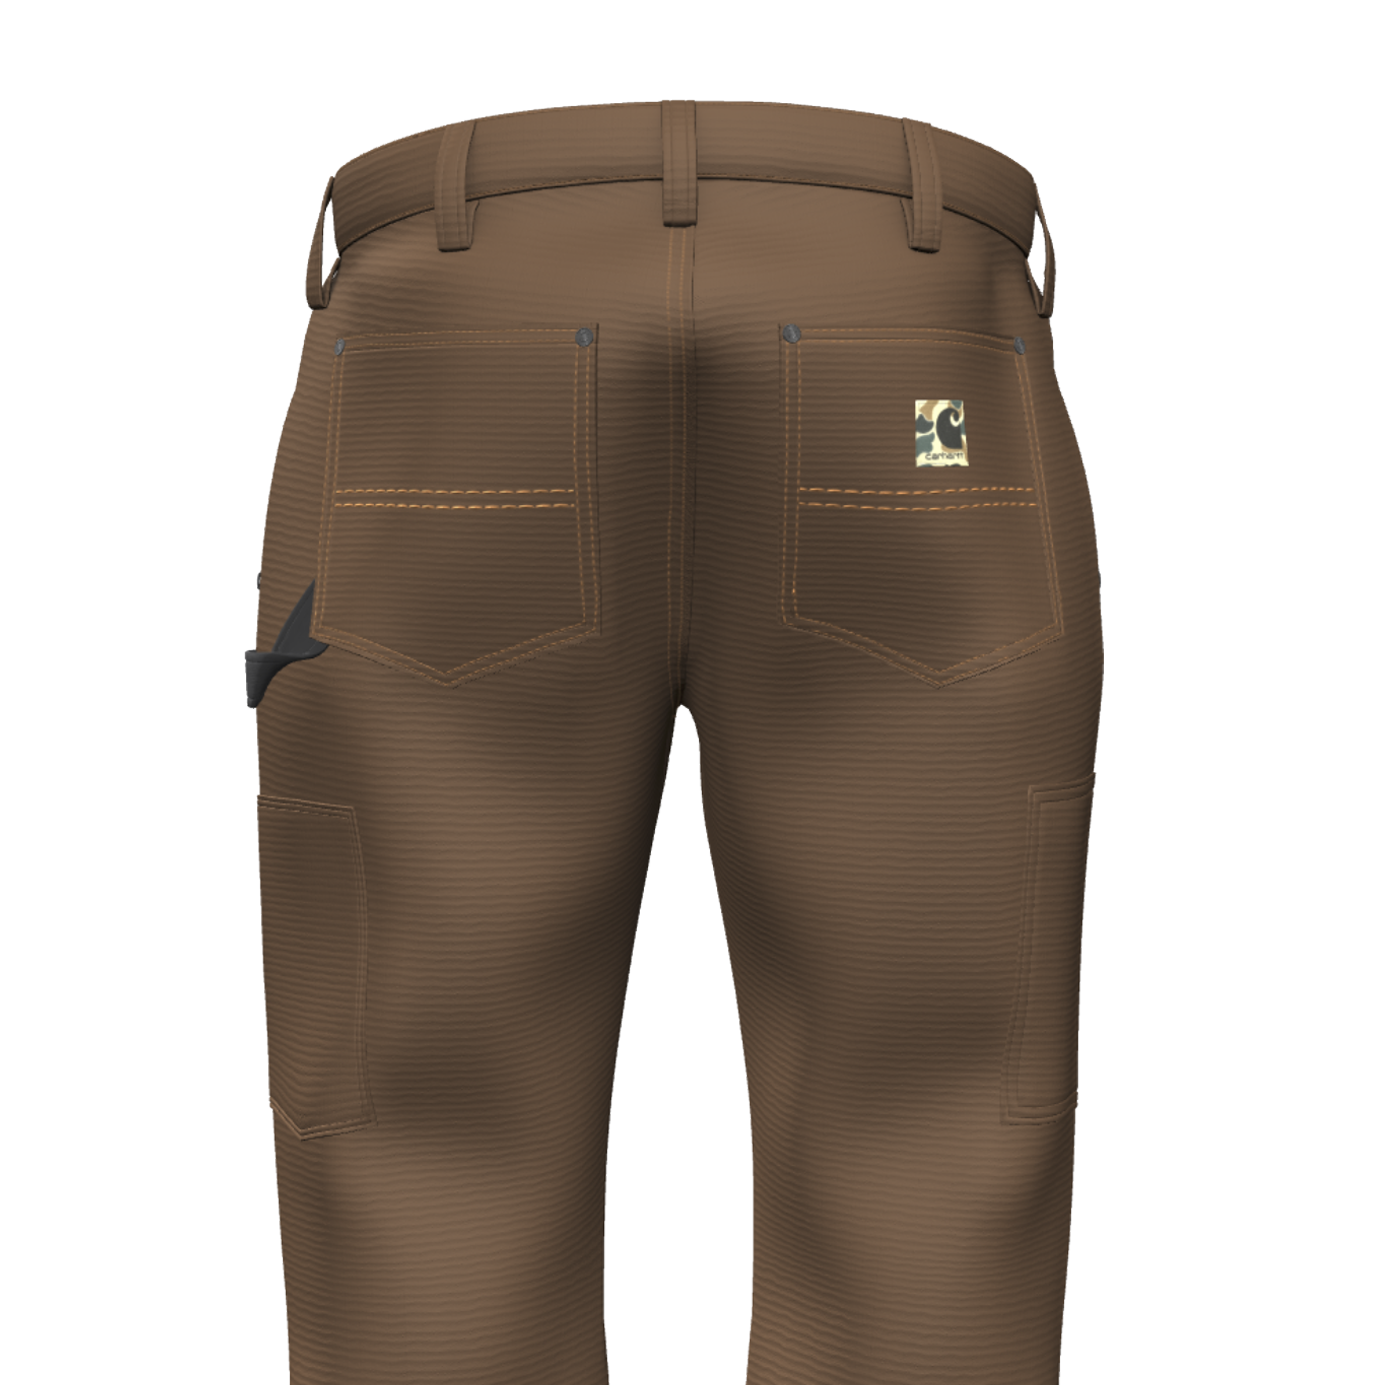 Men's Heritage Custom Work pant - Made in the USA of Imported Parts –  Carhartt Inc